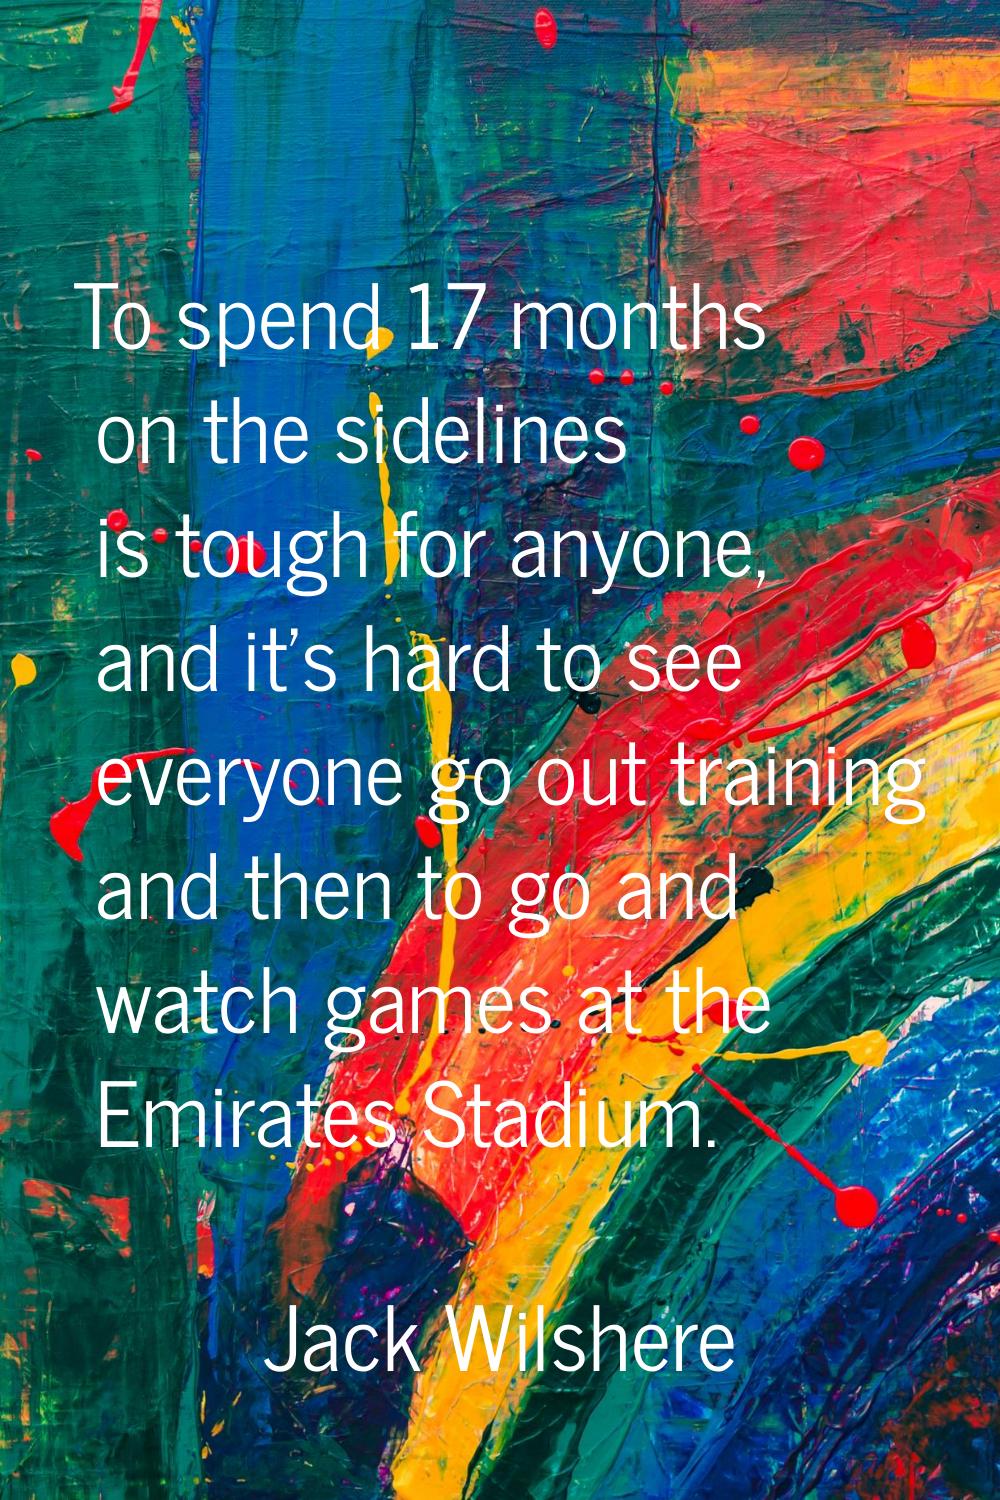 To spend 17 months on the sidelines is tough for anyone, and it's hard to see everyone go out train